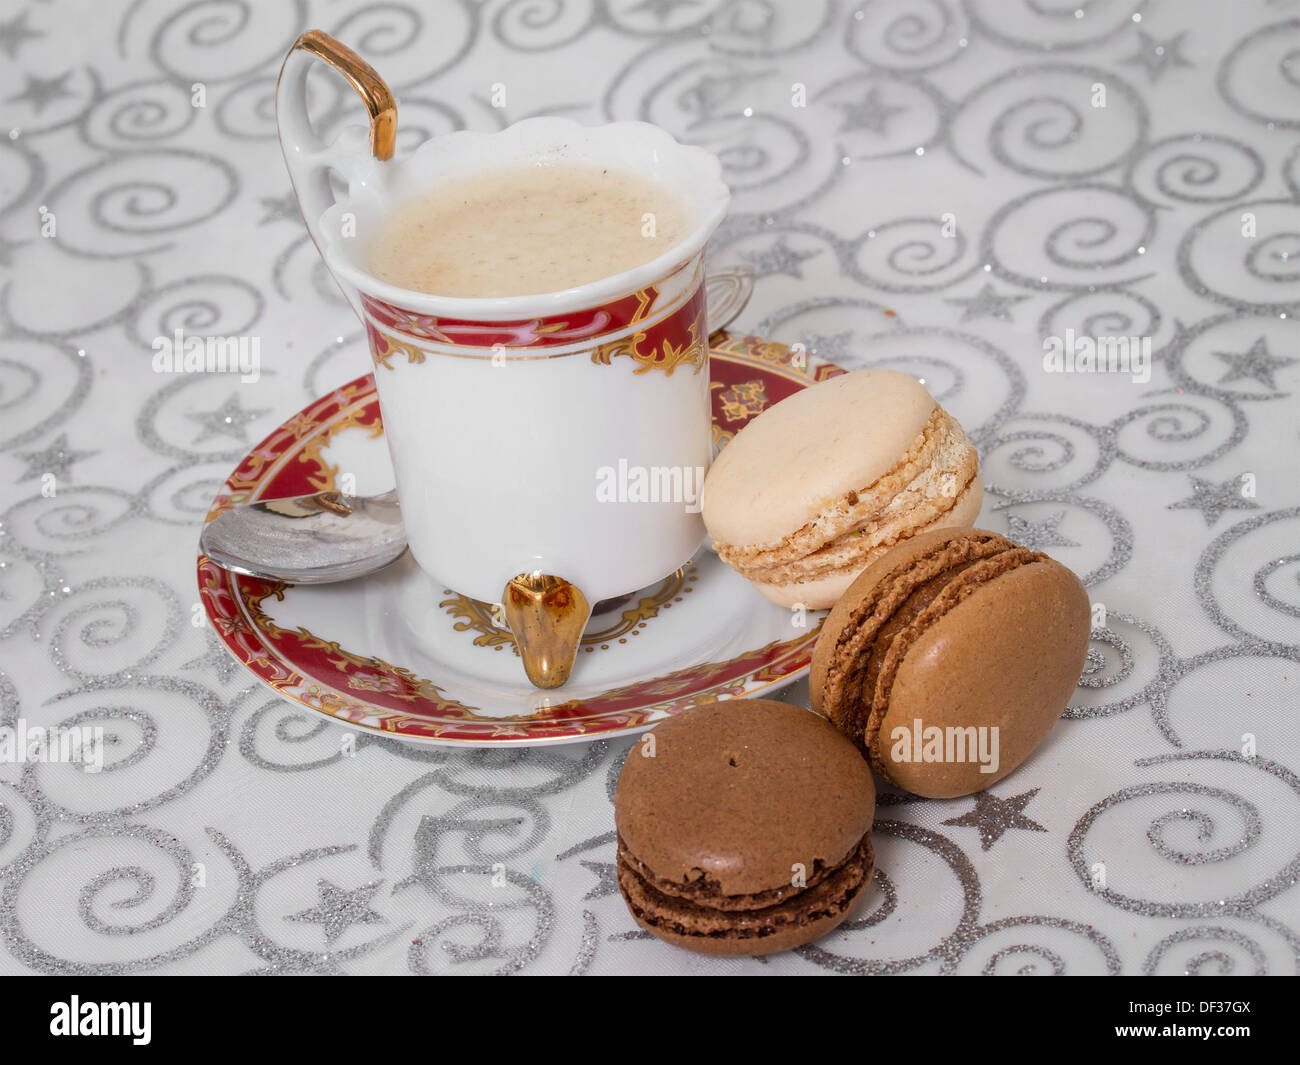 French macarons with a cup of coffee Stock Photo